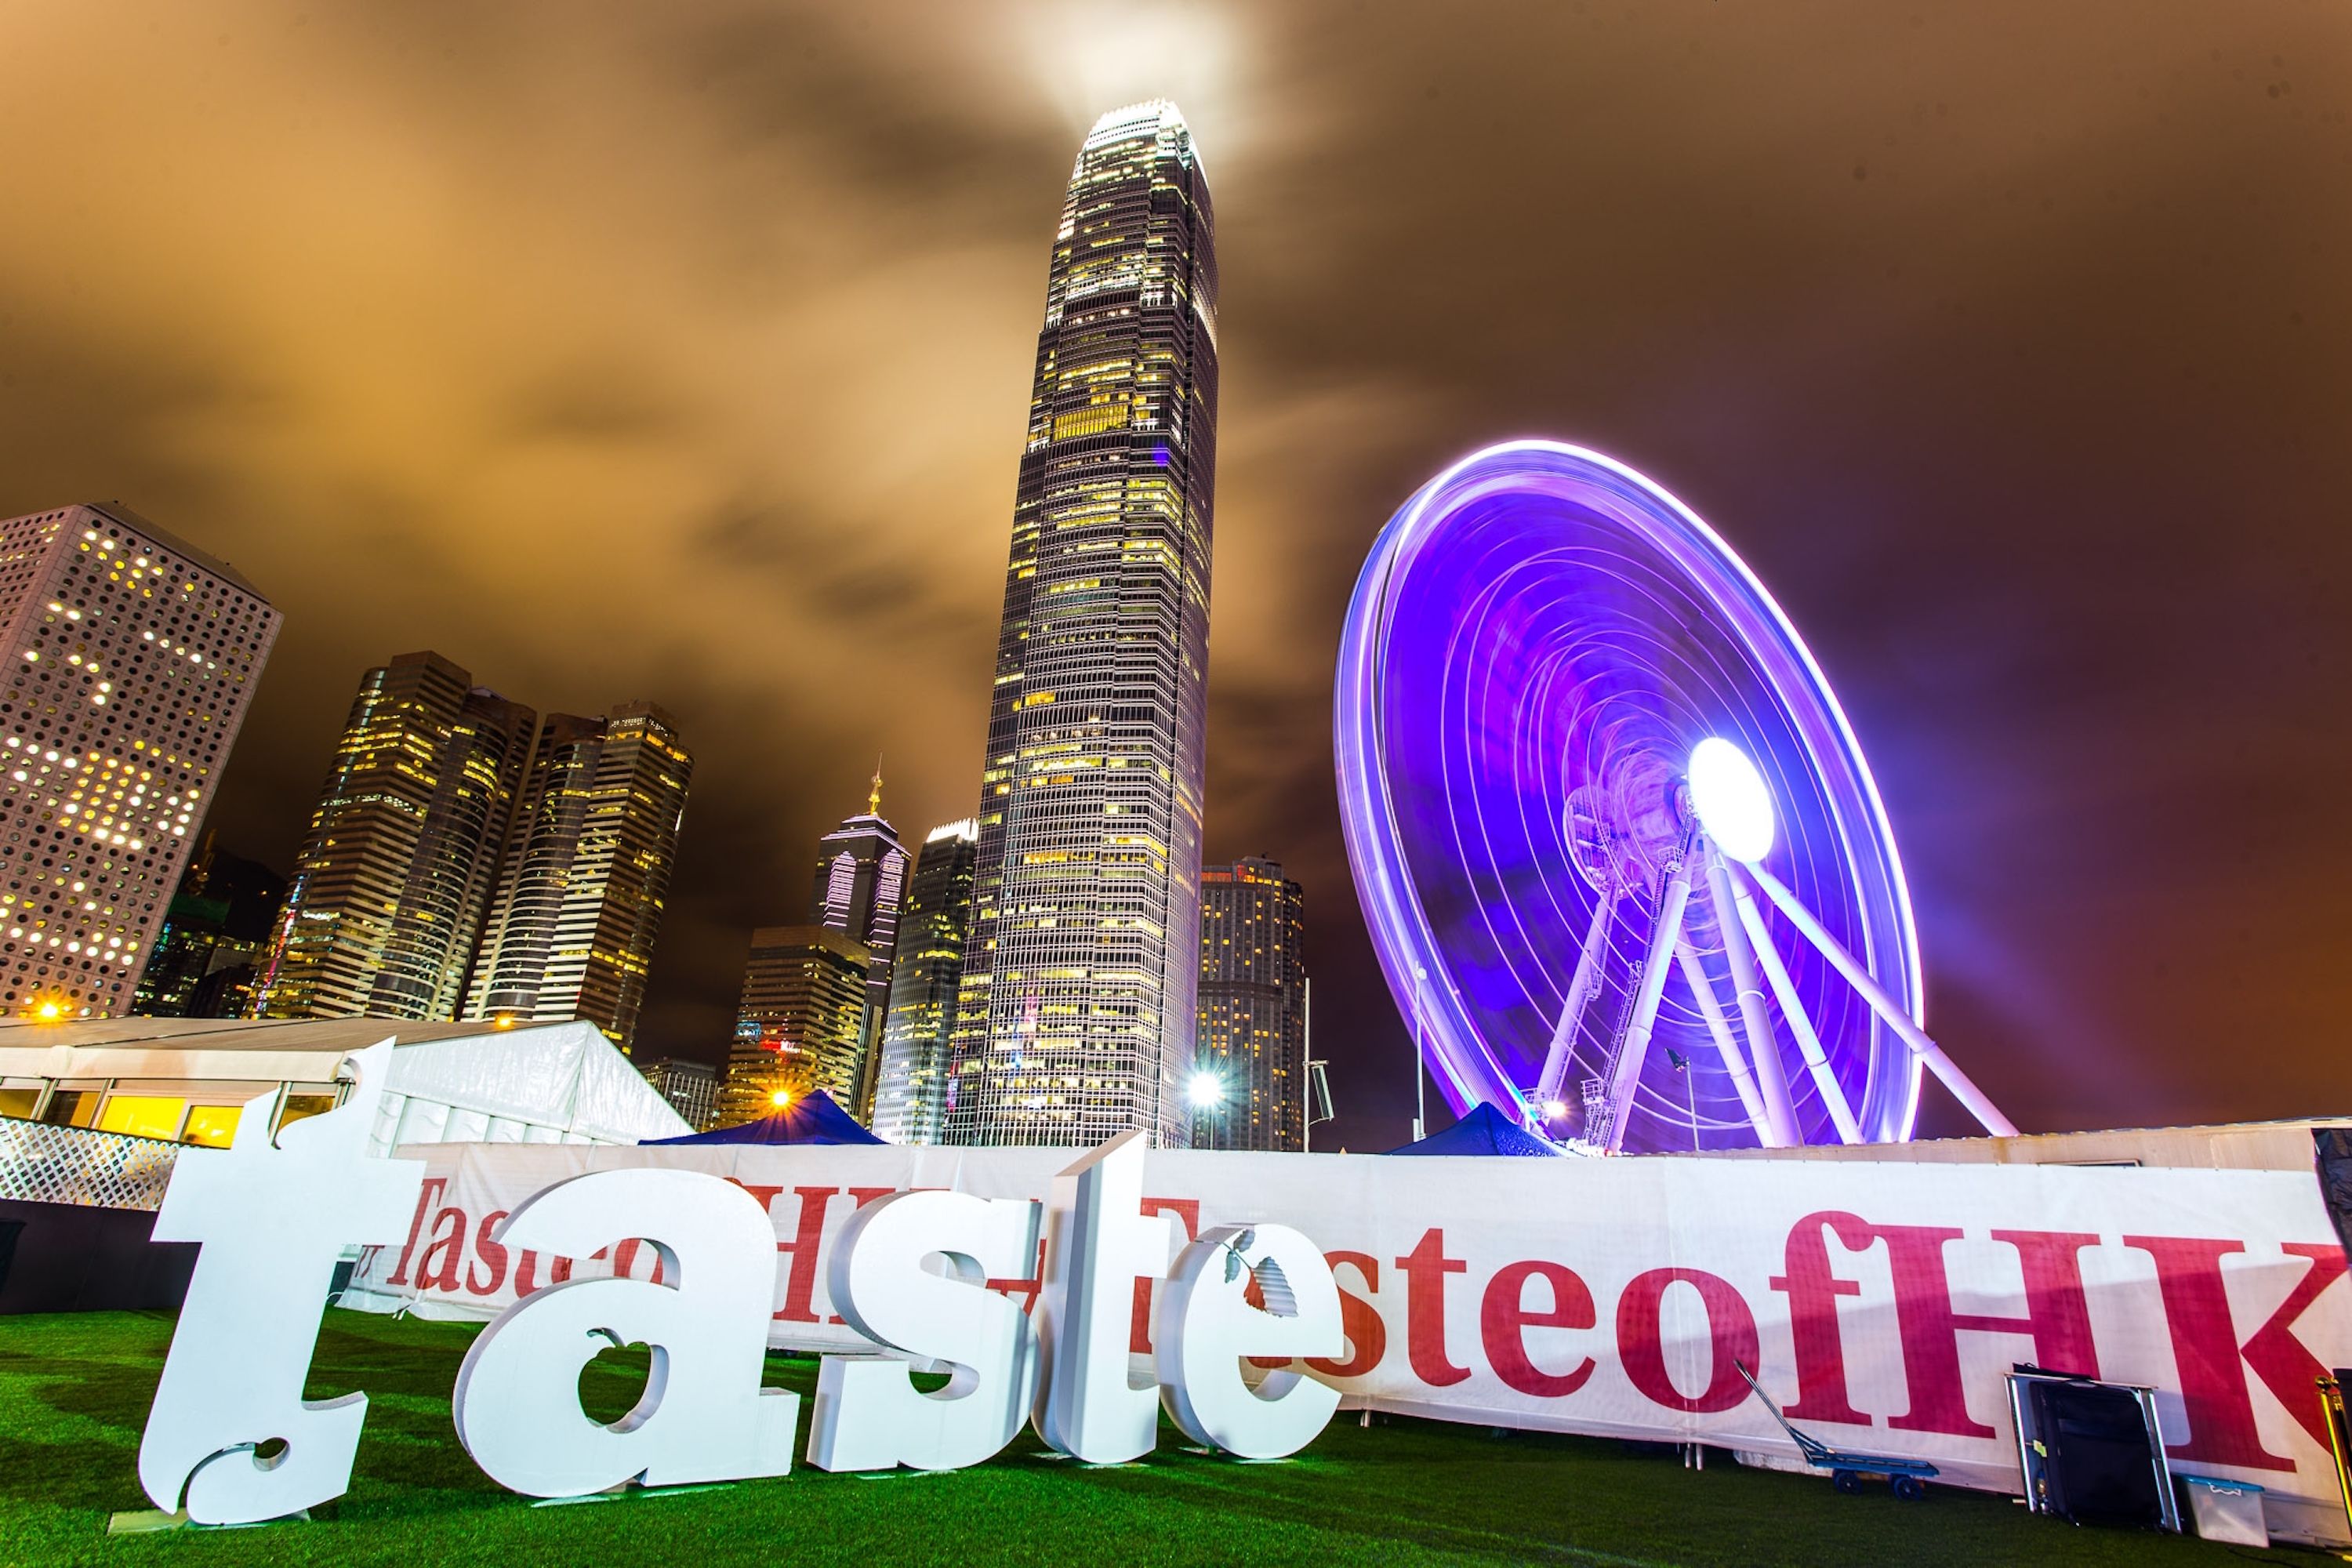 Giveaway: Win a VIP experience to Taste of Hong Kong 2017